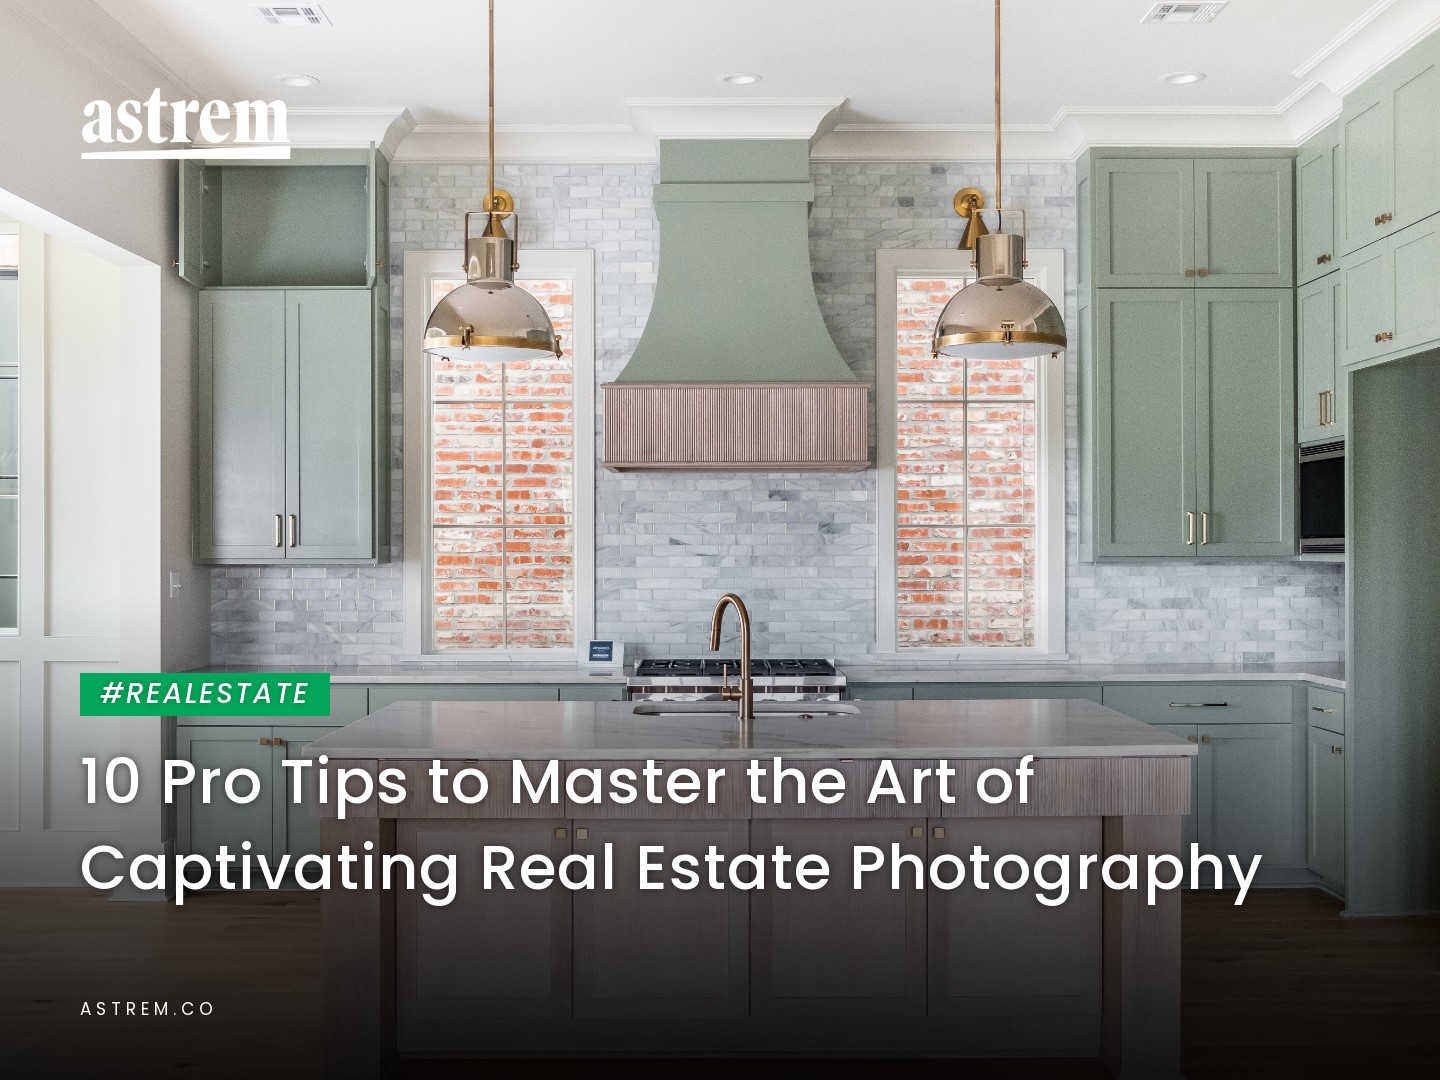 10 Pro Tips to Master the Art of Captivating Real Estate Photography Image